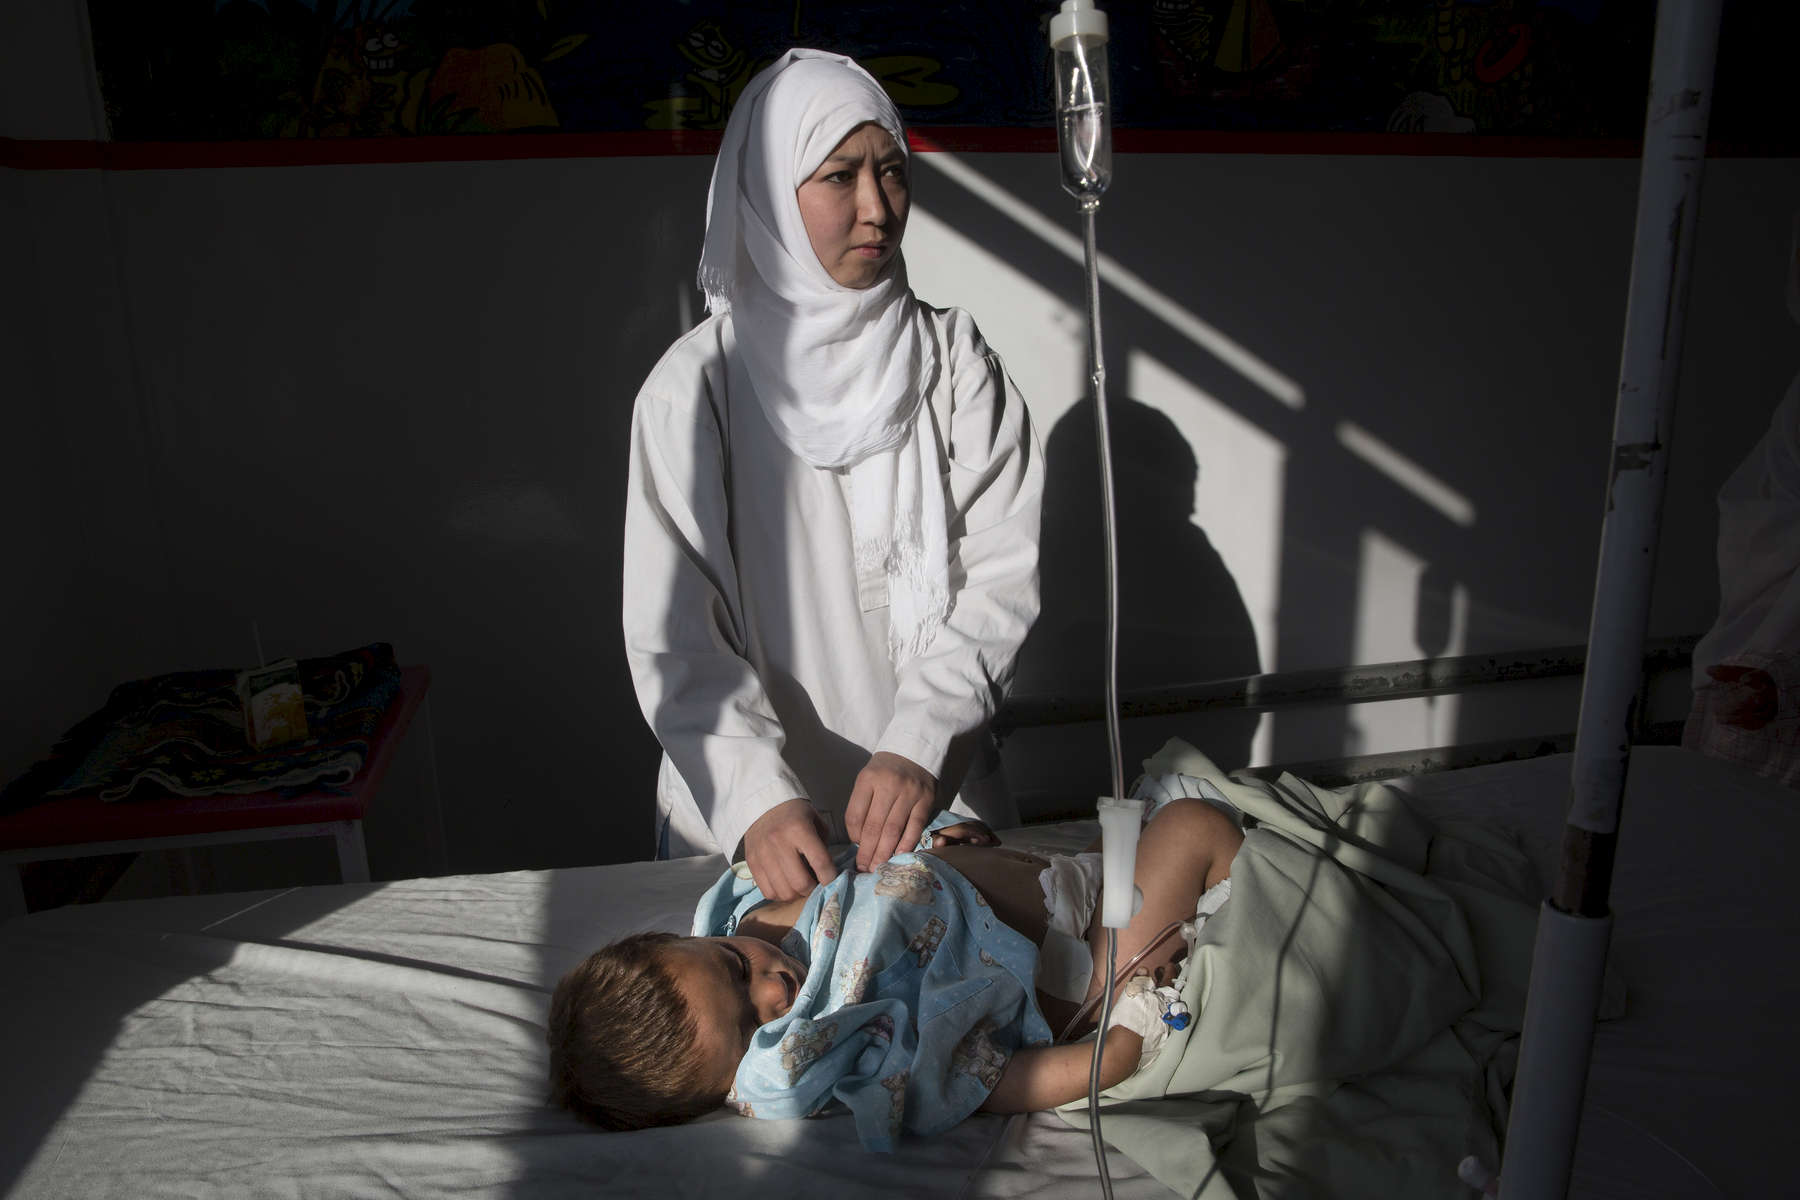 KABUL, AFGHANISTAN -MARCH 21, 2016:  Karima Mehrabi, a pediatric nurse cares for an infant in the women and children's ward at the Emergency hospital in Kabul on March 21, 2016. As of April, 2016 the Emergency hospital stated that in the first quarter their patient numbers were up more than 30% from last year. They stated that patients are coming from much further distances now especially since the bombing of the MSF hospital in Kunduz last year which cared for many in the region. Every year the UN comes out with their report documenting the unfortunate carnage from America’s longest and most costly war in history. Along with the price tag estimated in the hundreds of billions, the human toll from a 2015 UN Assistance Mission To Afghanistan (UNAMA) report stated the number of Afghan civilians killed and wounded surpassed 11,000.  which was the deadliest on record for civilians in Afghanistan since the US-led invasion more than 14 years ago. 